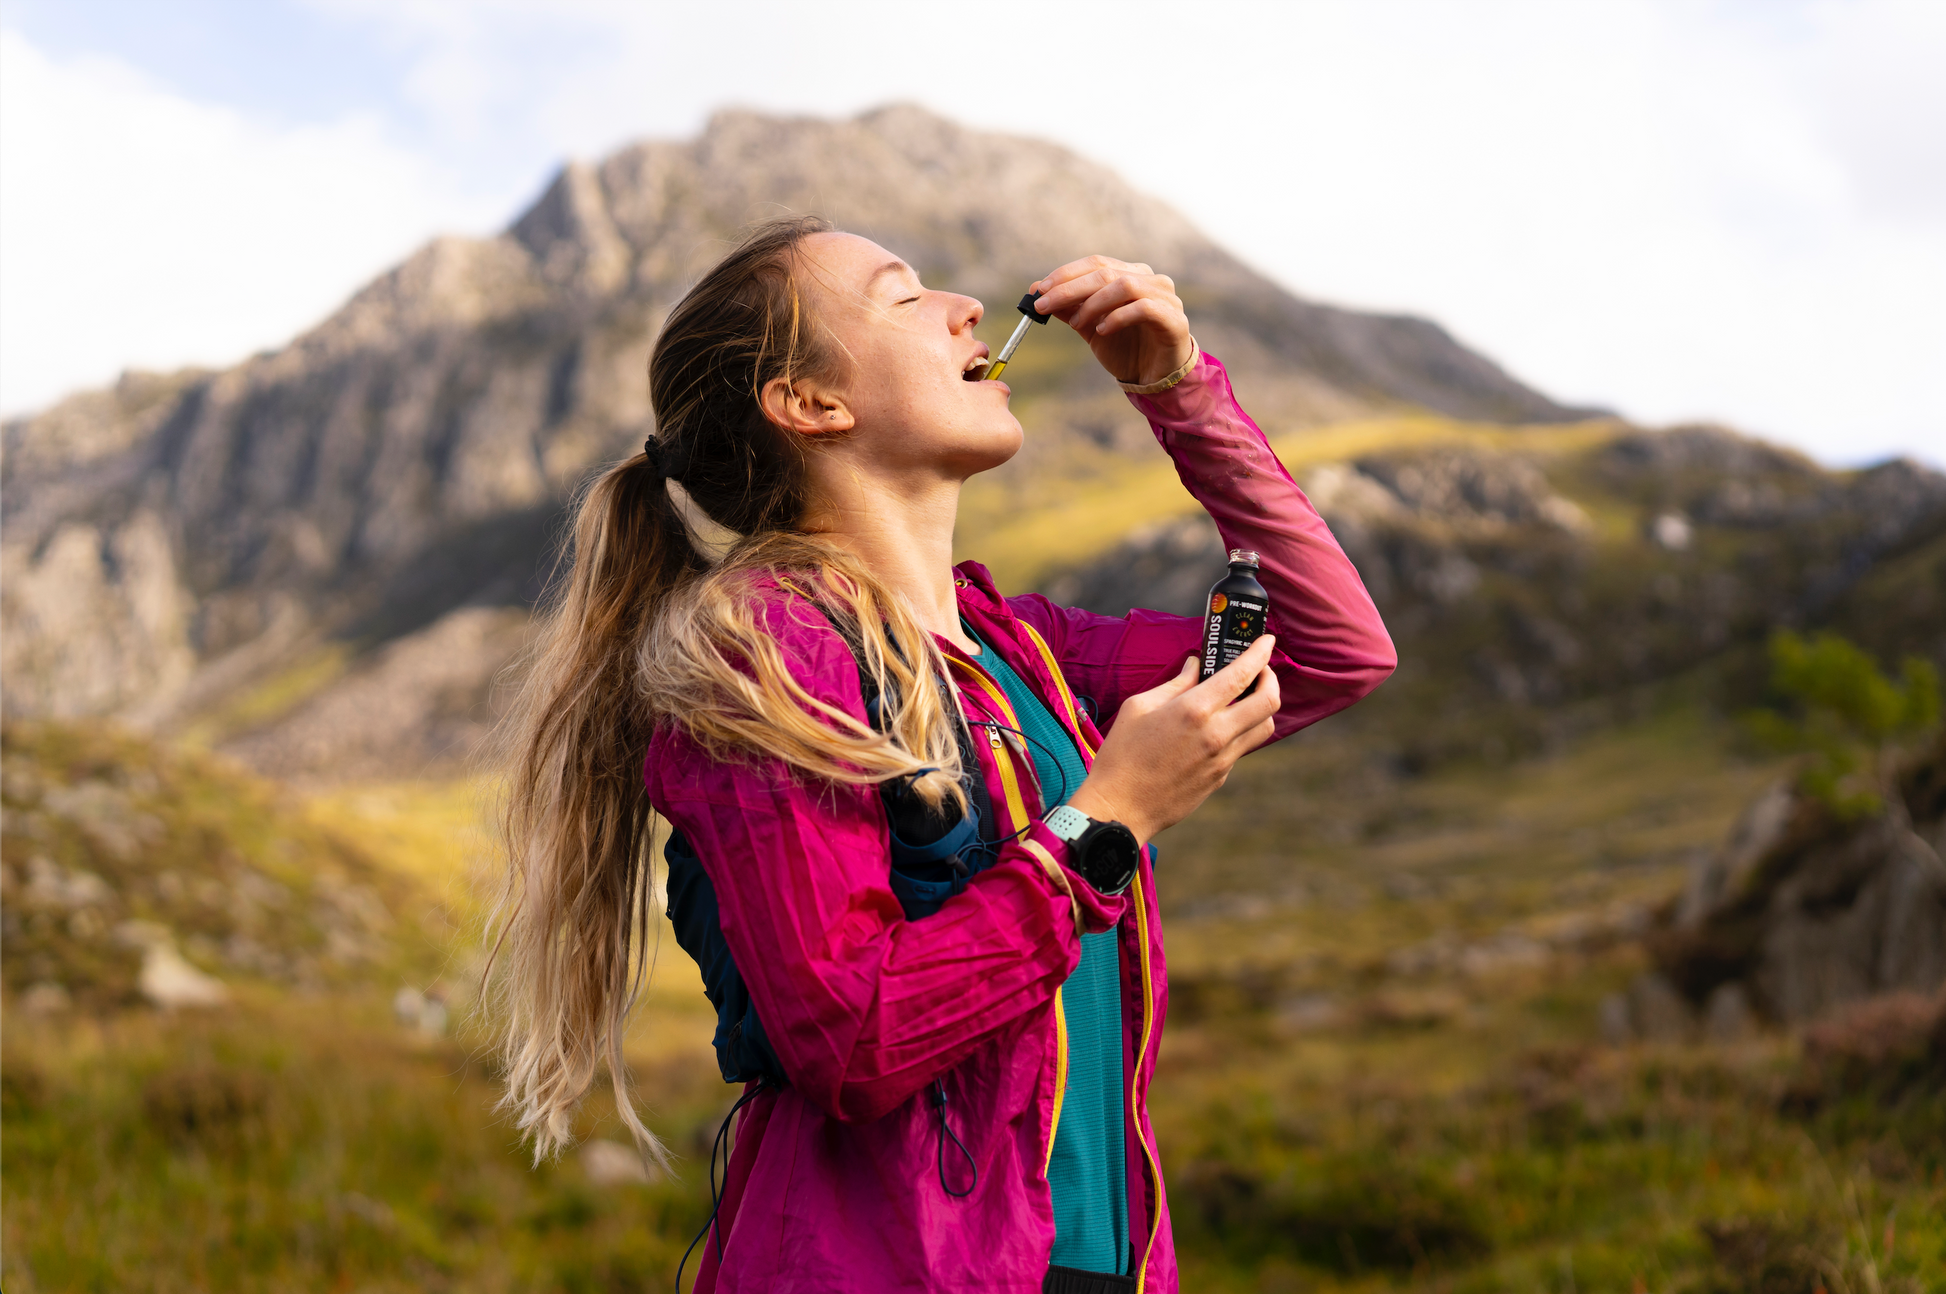 Image of trail runner using Soulside Clean Energy tincture, a natural herbal supplement to boost natural energy, focus, athletic performance, endurance and stamina.